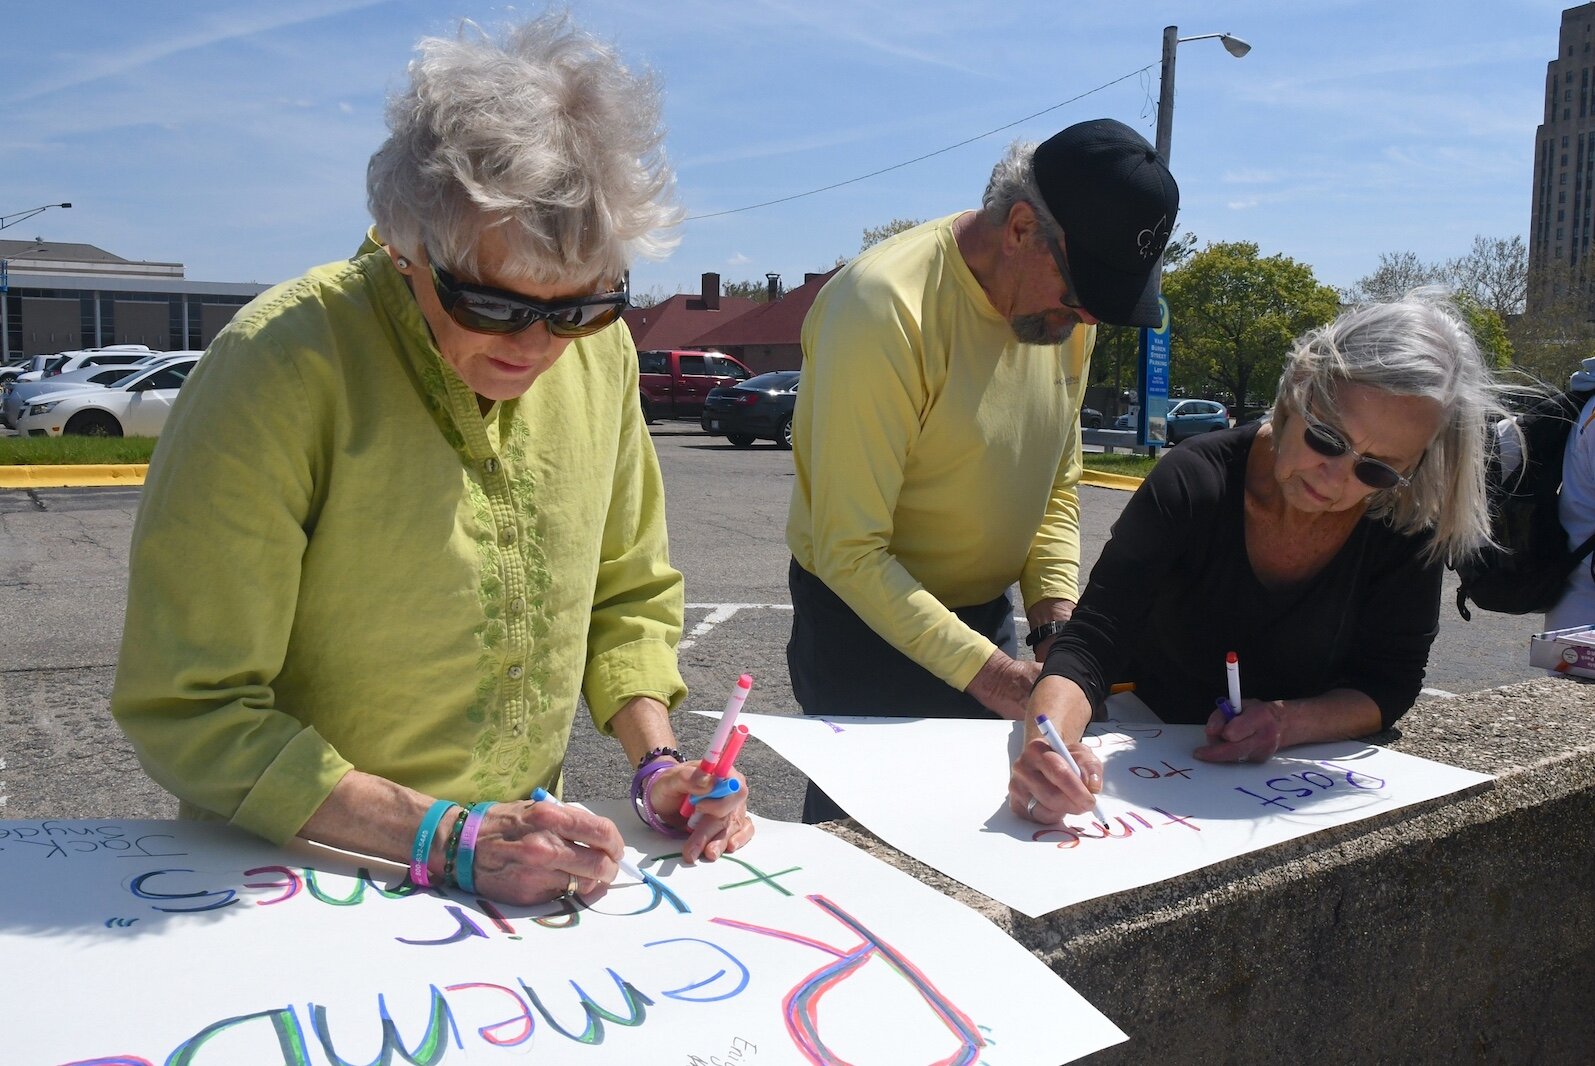 Preparing signs prior to an anti-gun violence march and rally in downtown Battle Creek are from left, Sue Keitel, Rich and Sue Heeres.